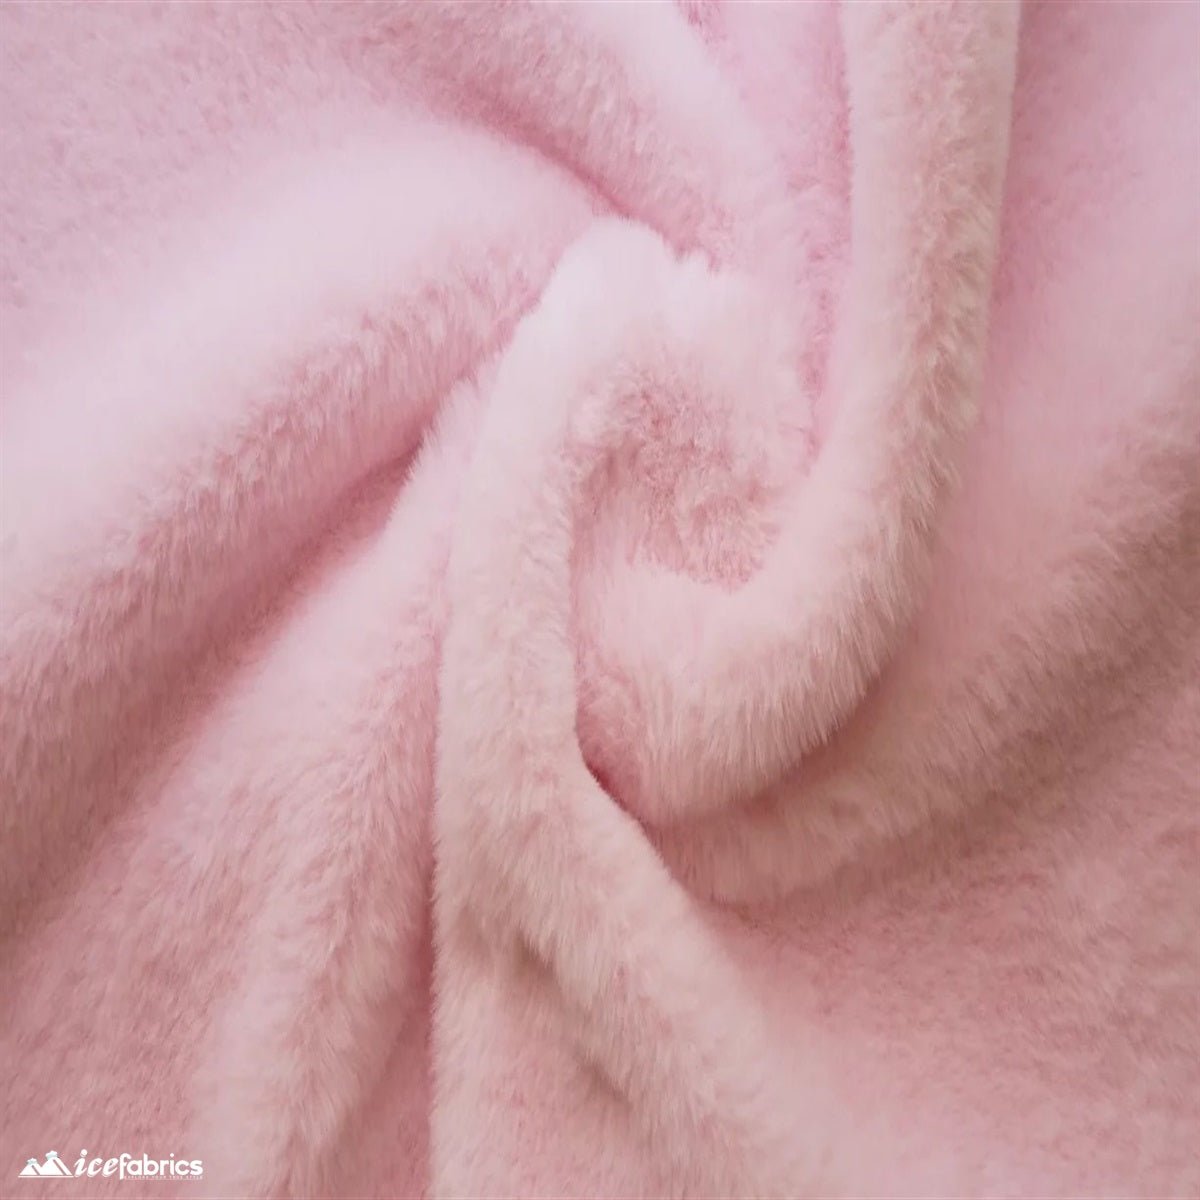 Bunny Thick Faux Fur Minky Fabric / Short Pile / Super SoftICE FABRICSICE FABRICSPinkBy The Yard (60 inches Wide)Bunny Thick Faux Fur Minky Fabric / Short Pile / Super Soft ICE FABRICS Pink